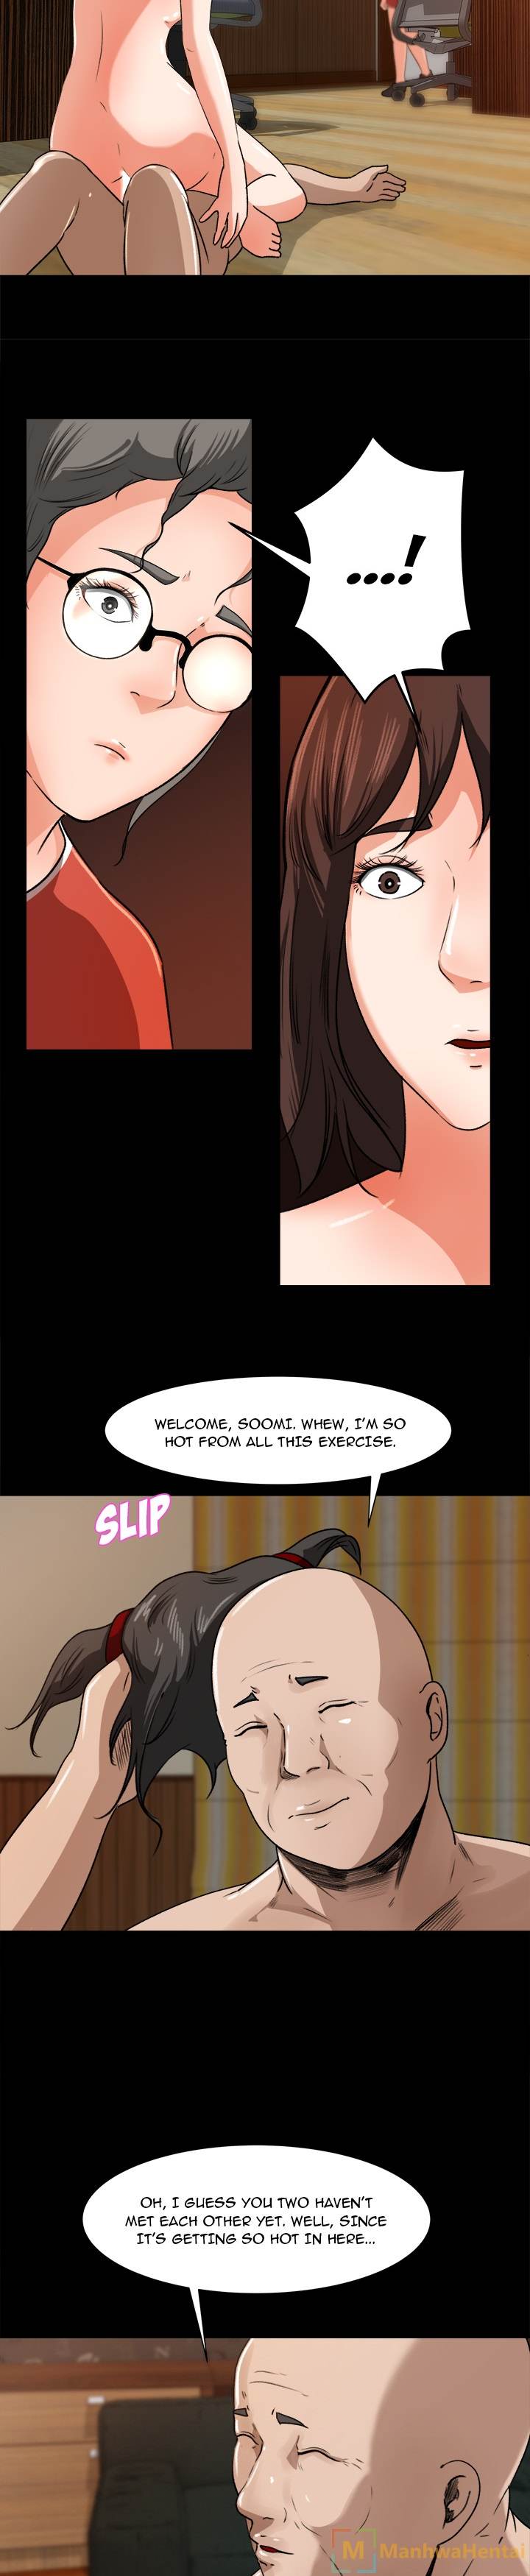 Inside the Uniform - Chapter 24 Page 9